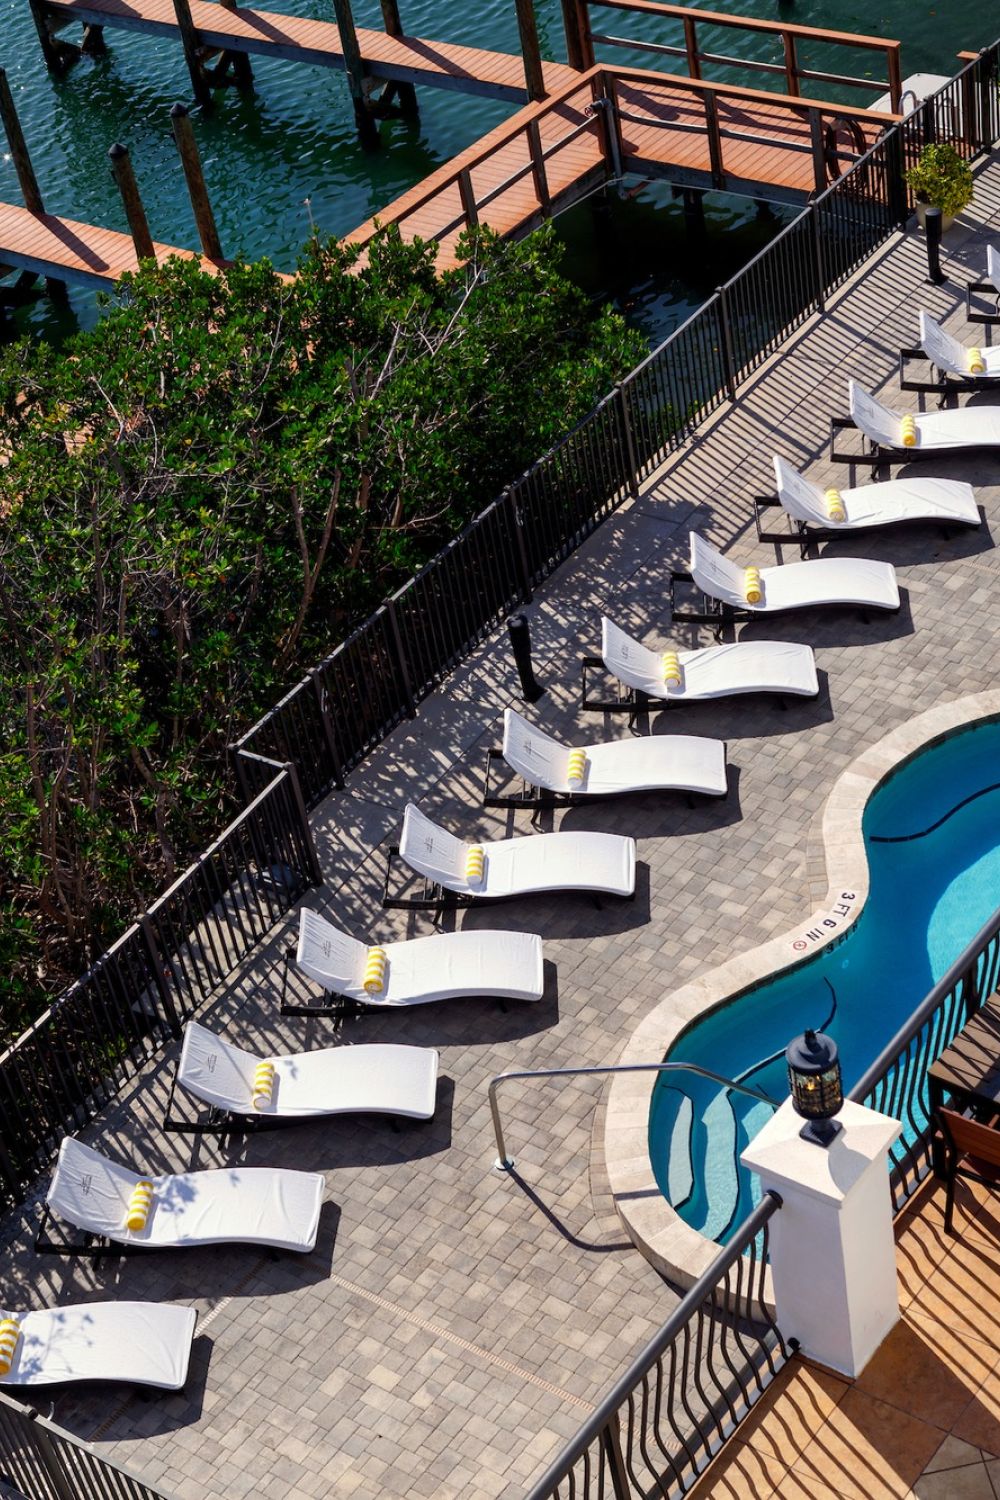 Looking down on the outdoor pool area with lounge chairs at The Hotel Zamora